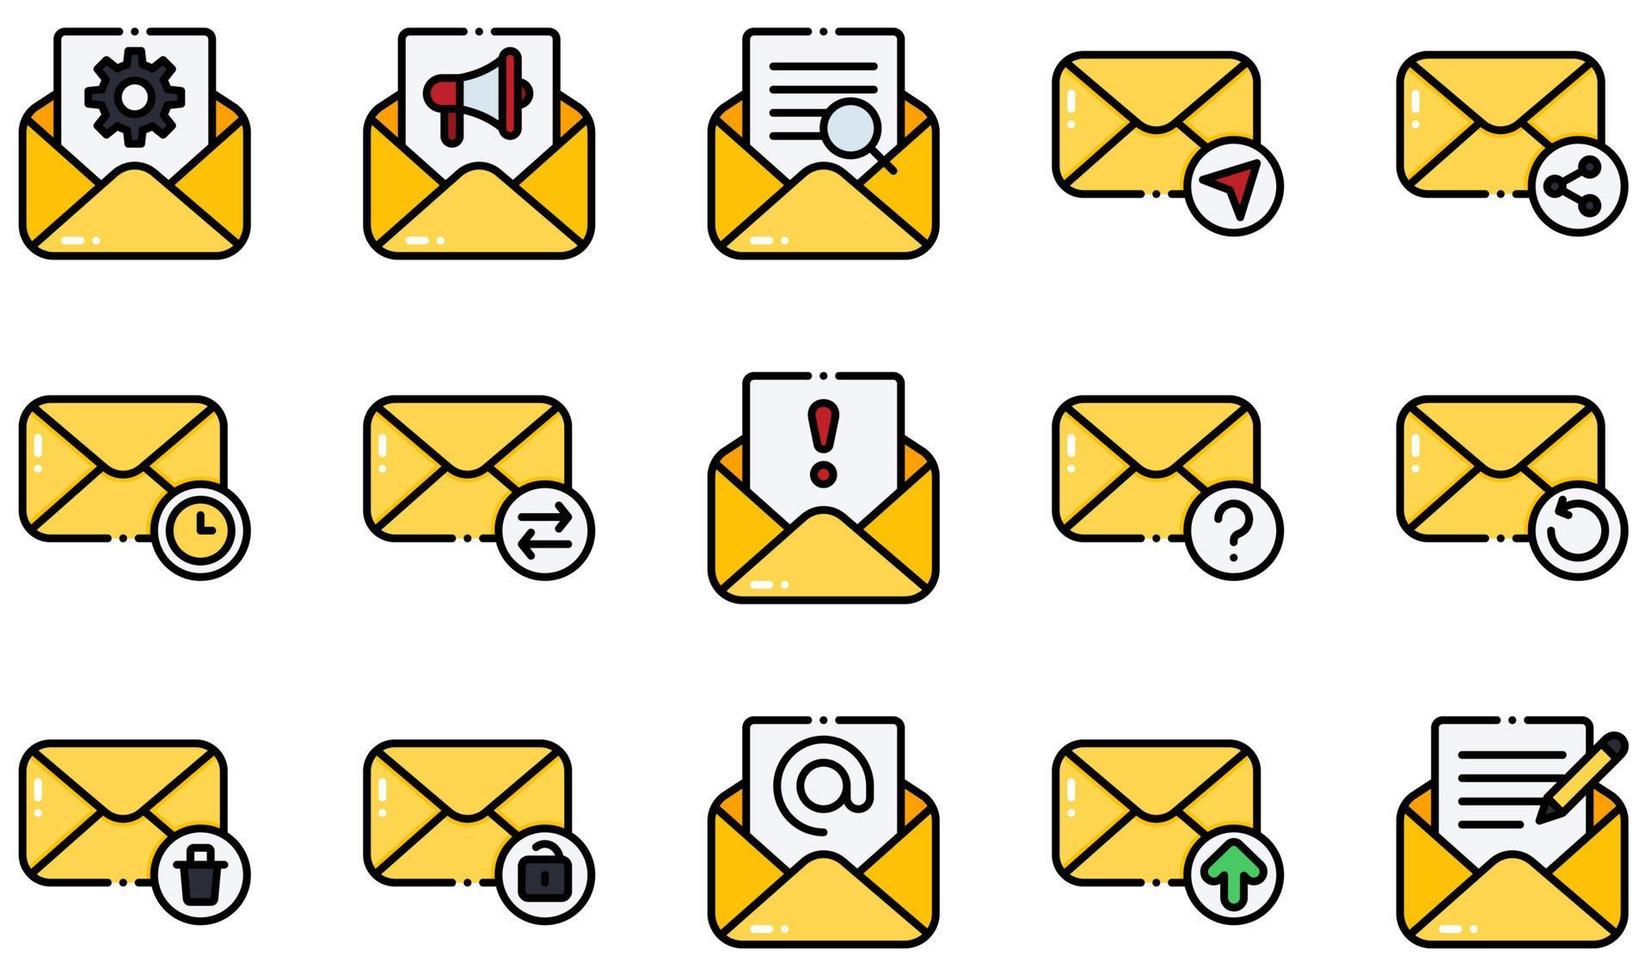 Set of Vector Icons Related to Email. Contains such Icons as Open Email, Options, Searching, Send Mail, Spam, Upload and more.